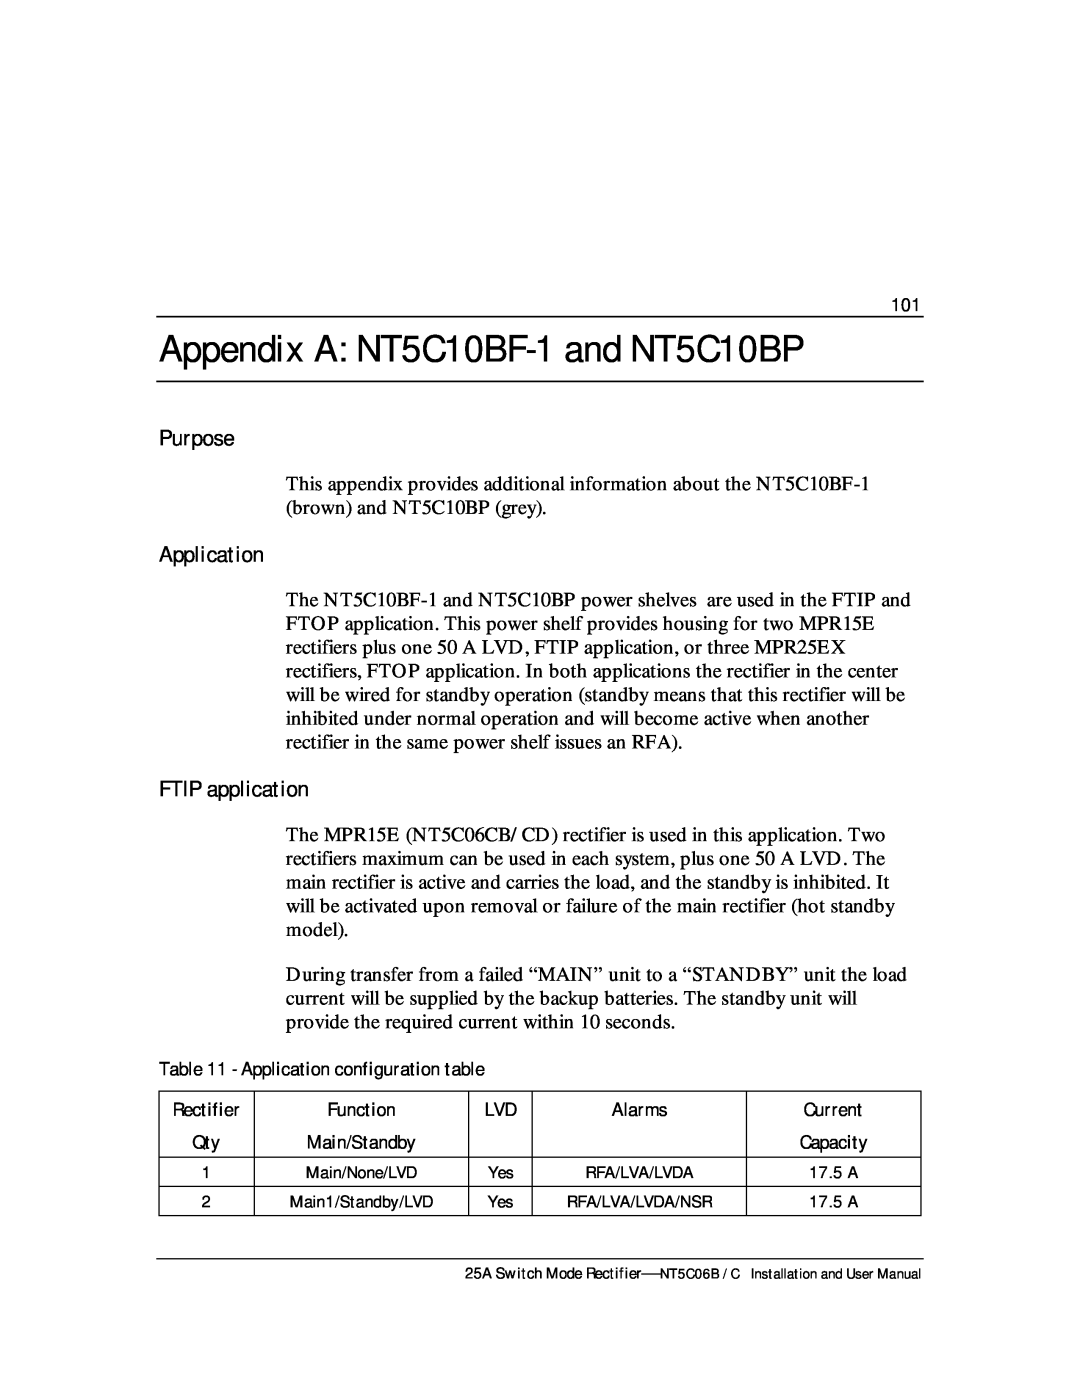 Emerson MPR25 Appendix A NT5C10BF-1 and NT5C10BP, Purpose, FTIP application, Application configuration table, Function 